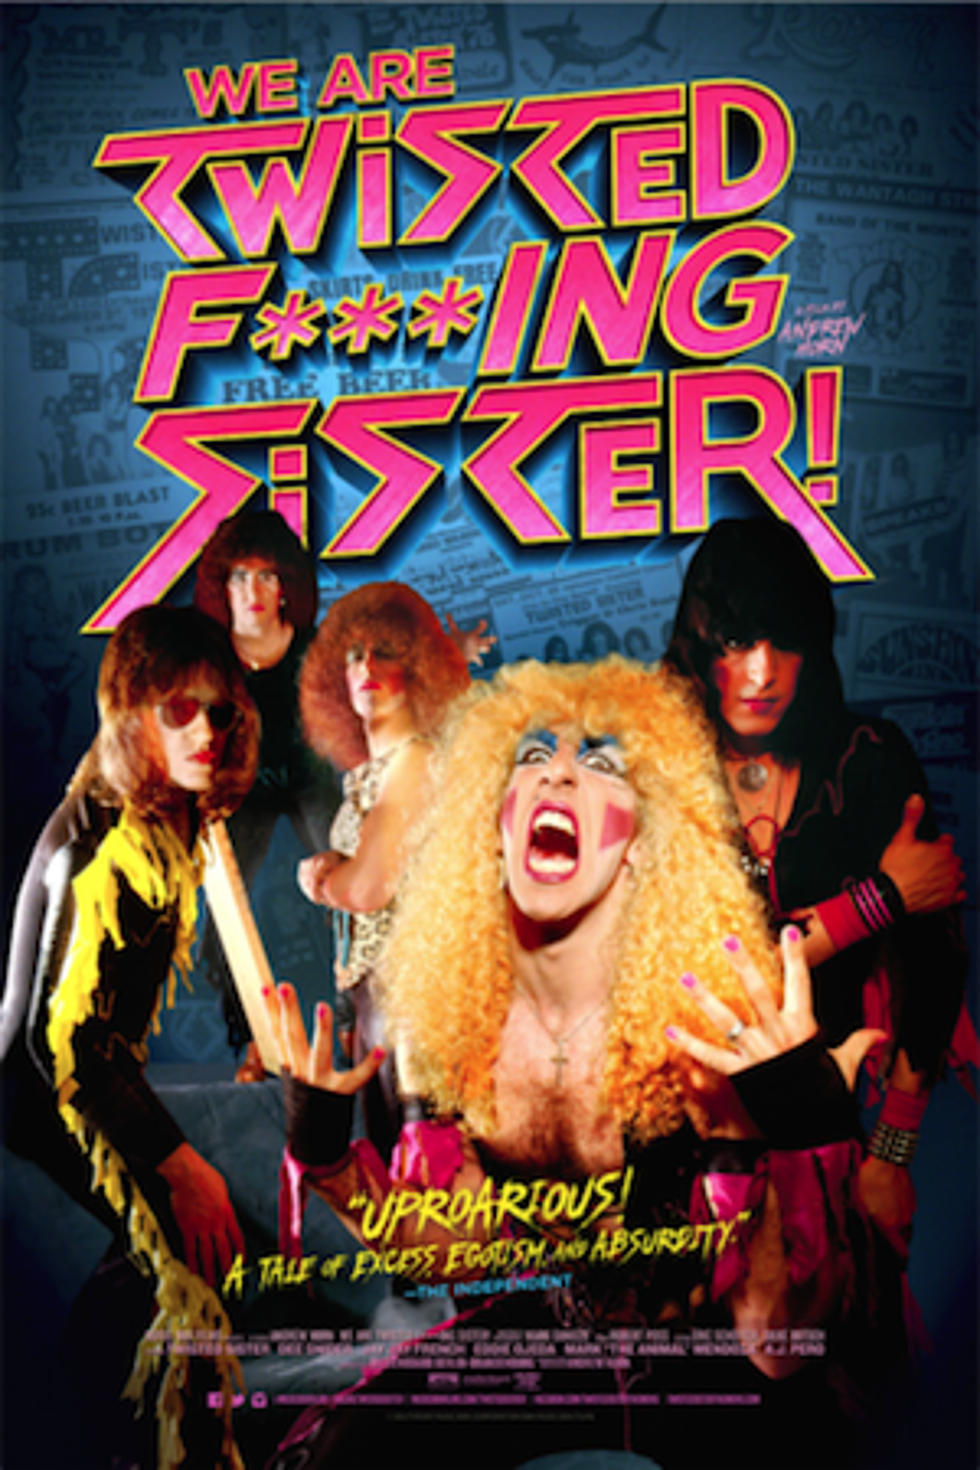 &#8216;We Are Twisted F&#8212;ing Sister!&#8217; Documentary to Receive Theatrical Screenings